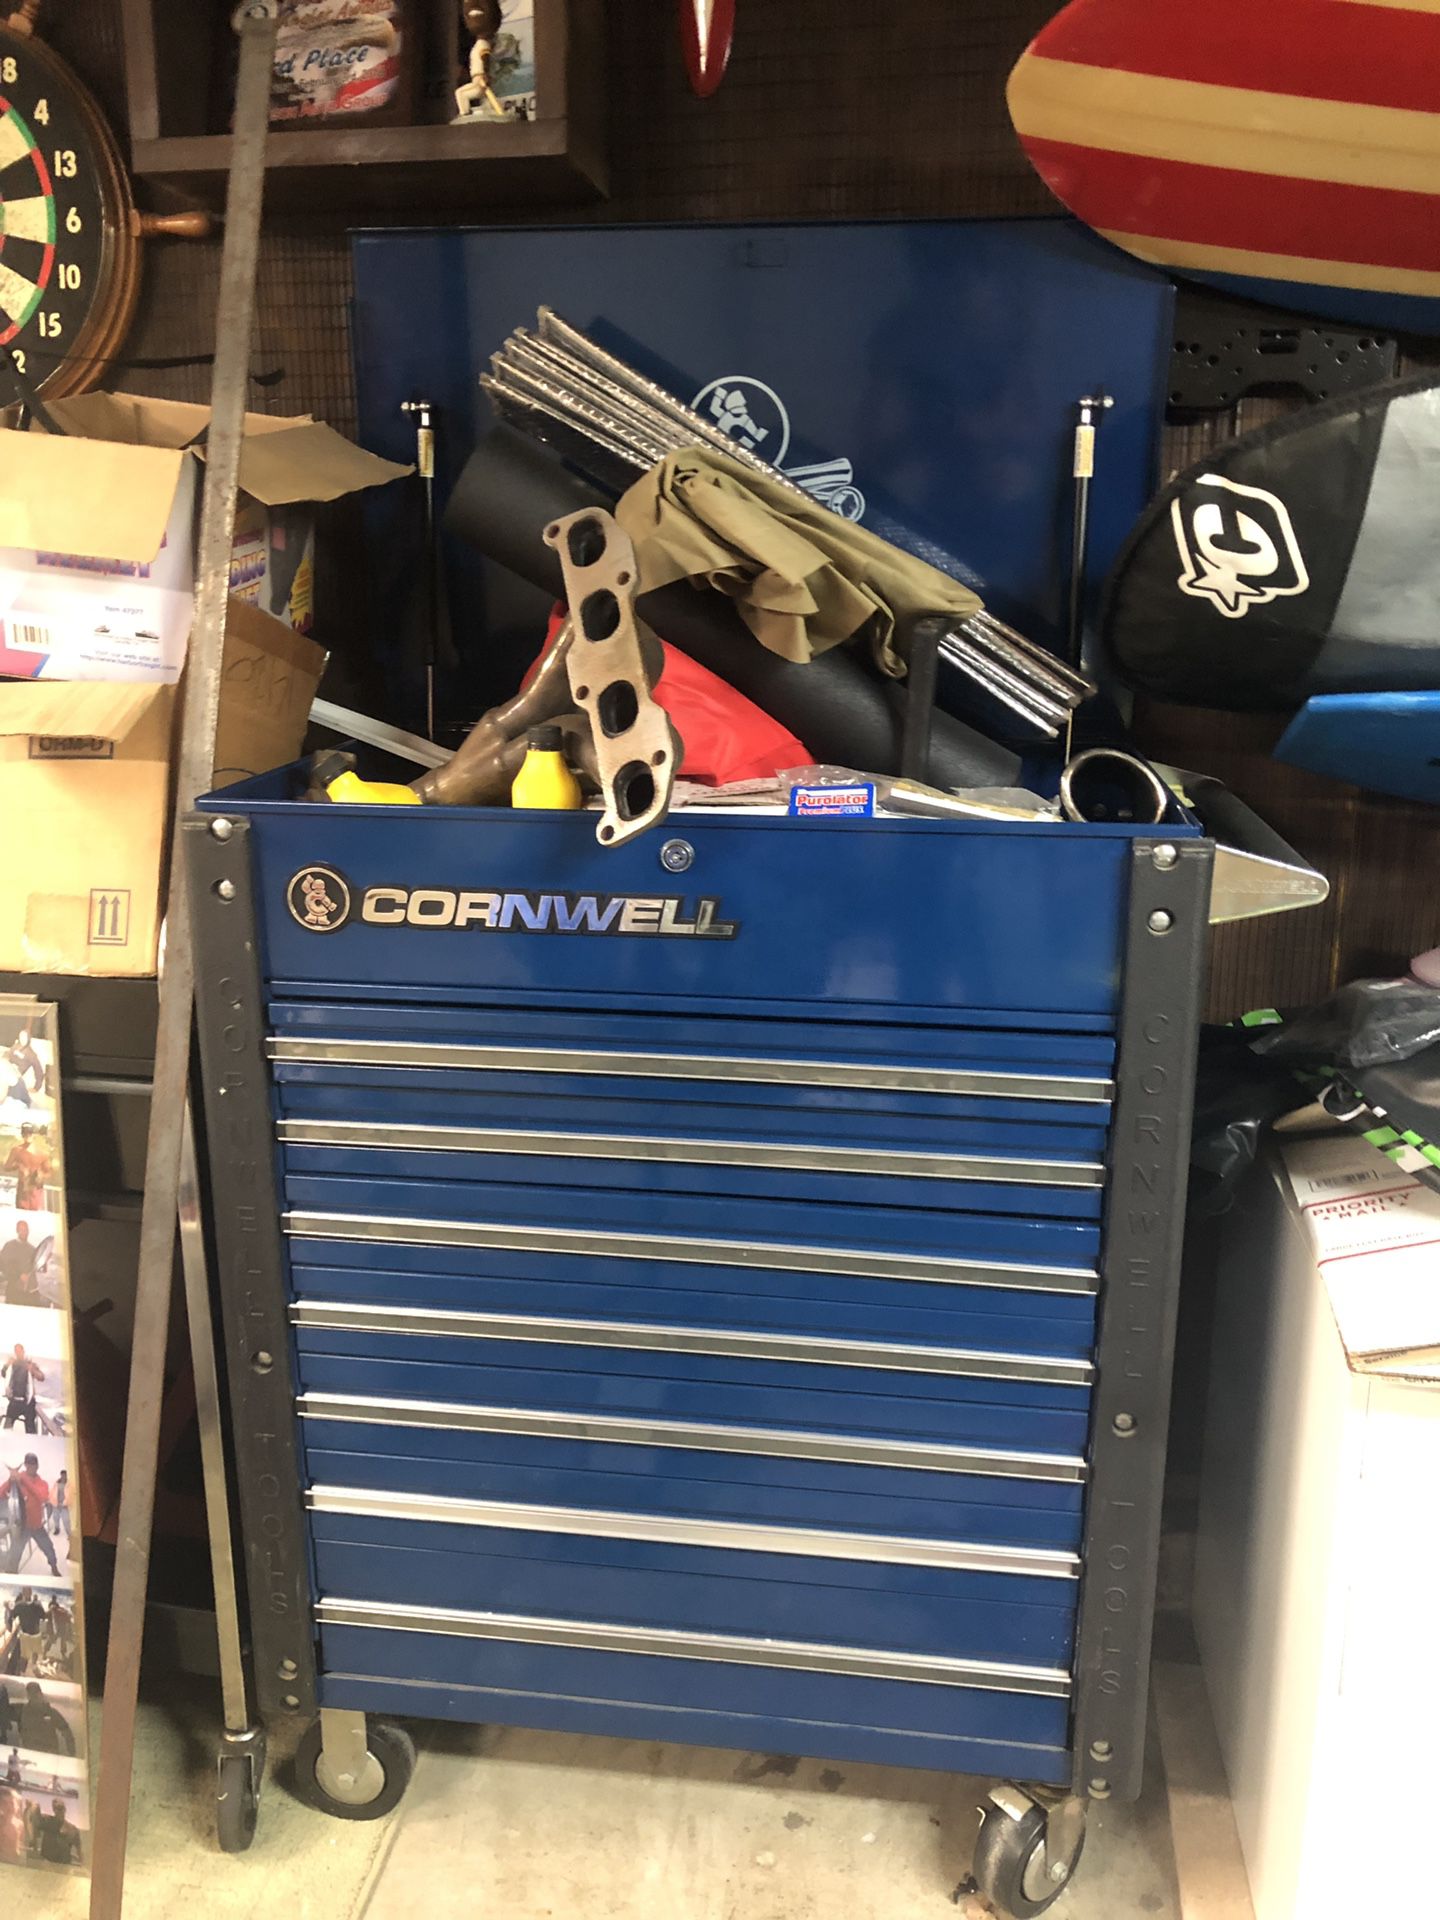 Cornwell 7 drawer toolbox with tools